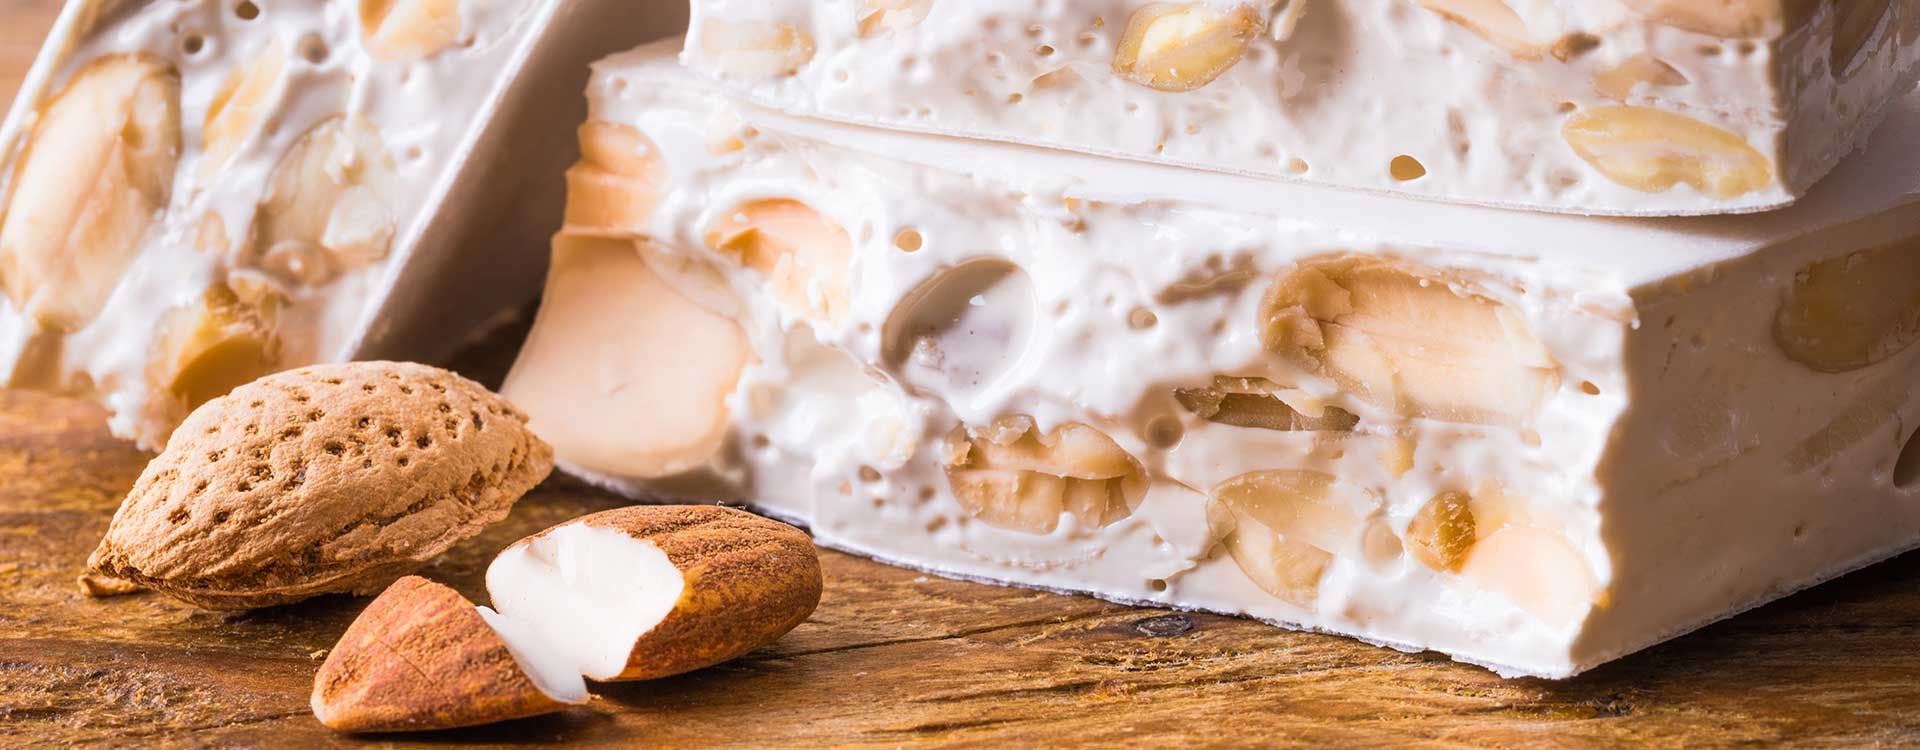 Nougat from Cremona: the story of a Christmas classic